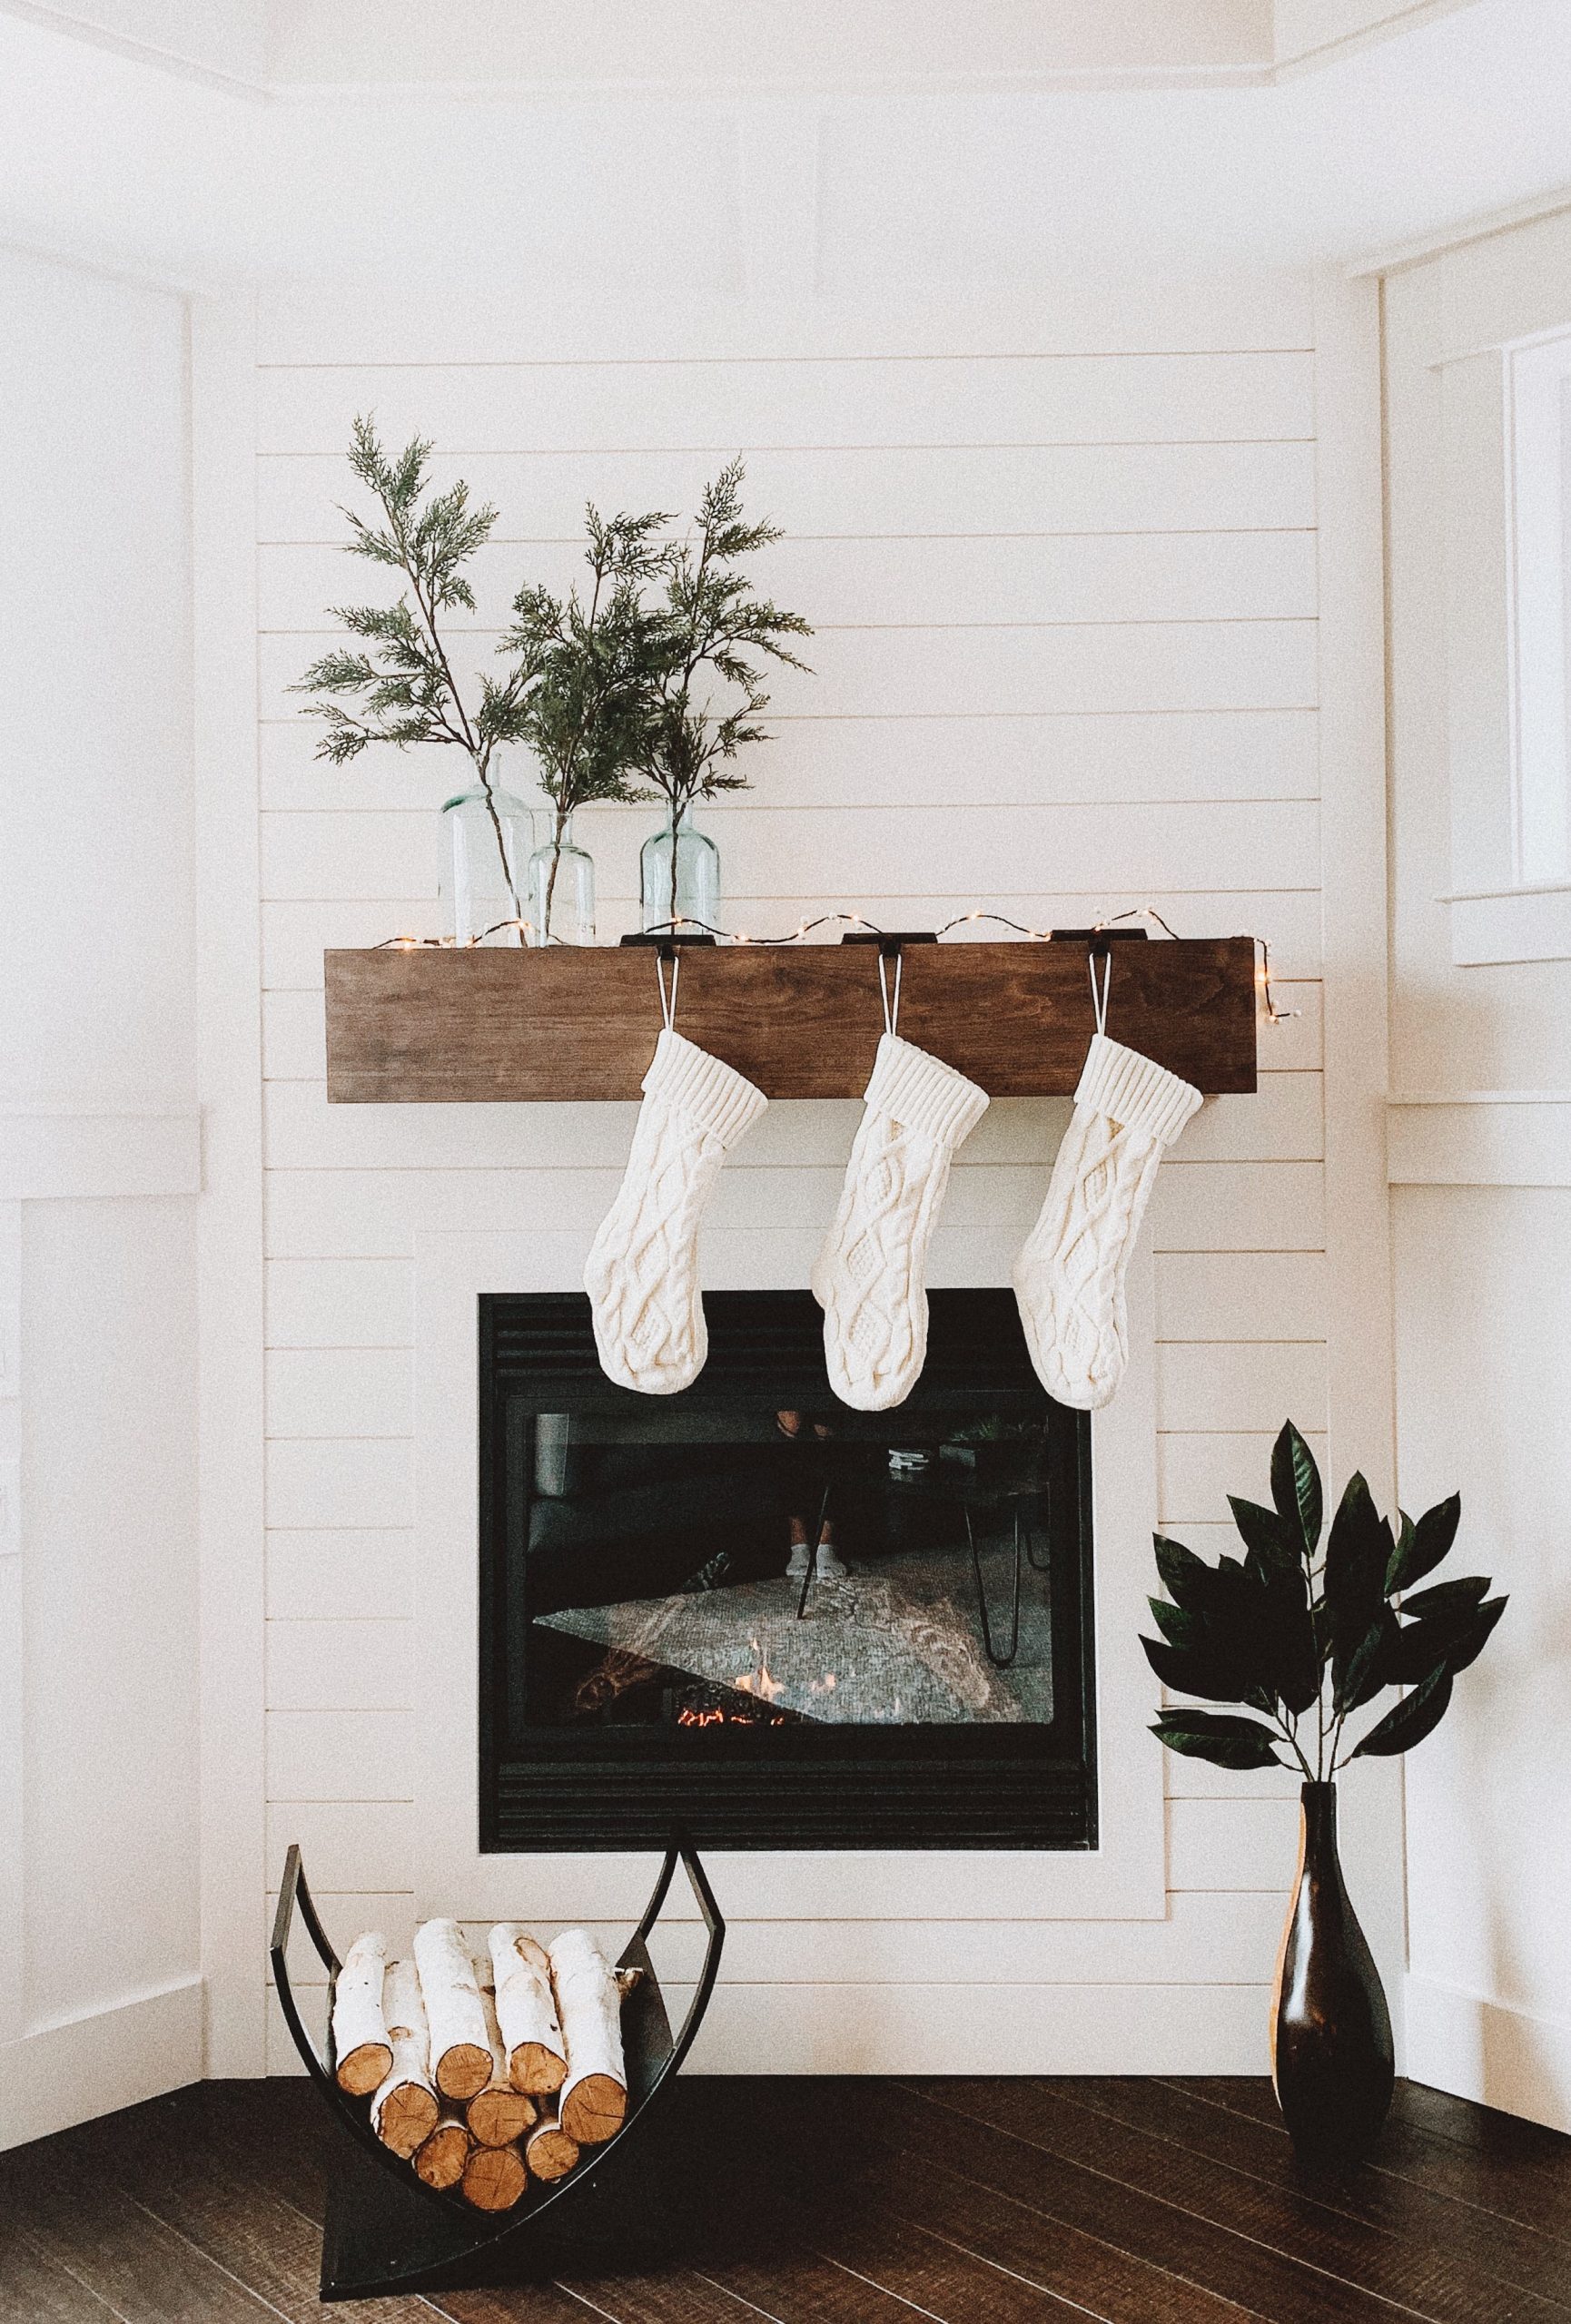 Instagram worthy holiday home decorations